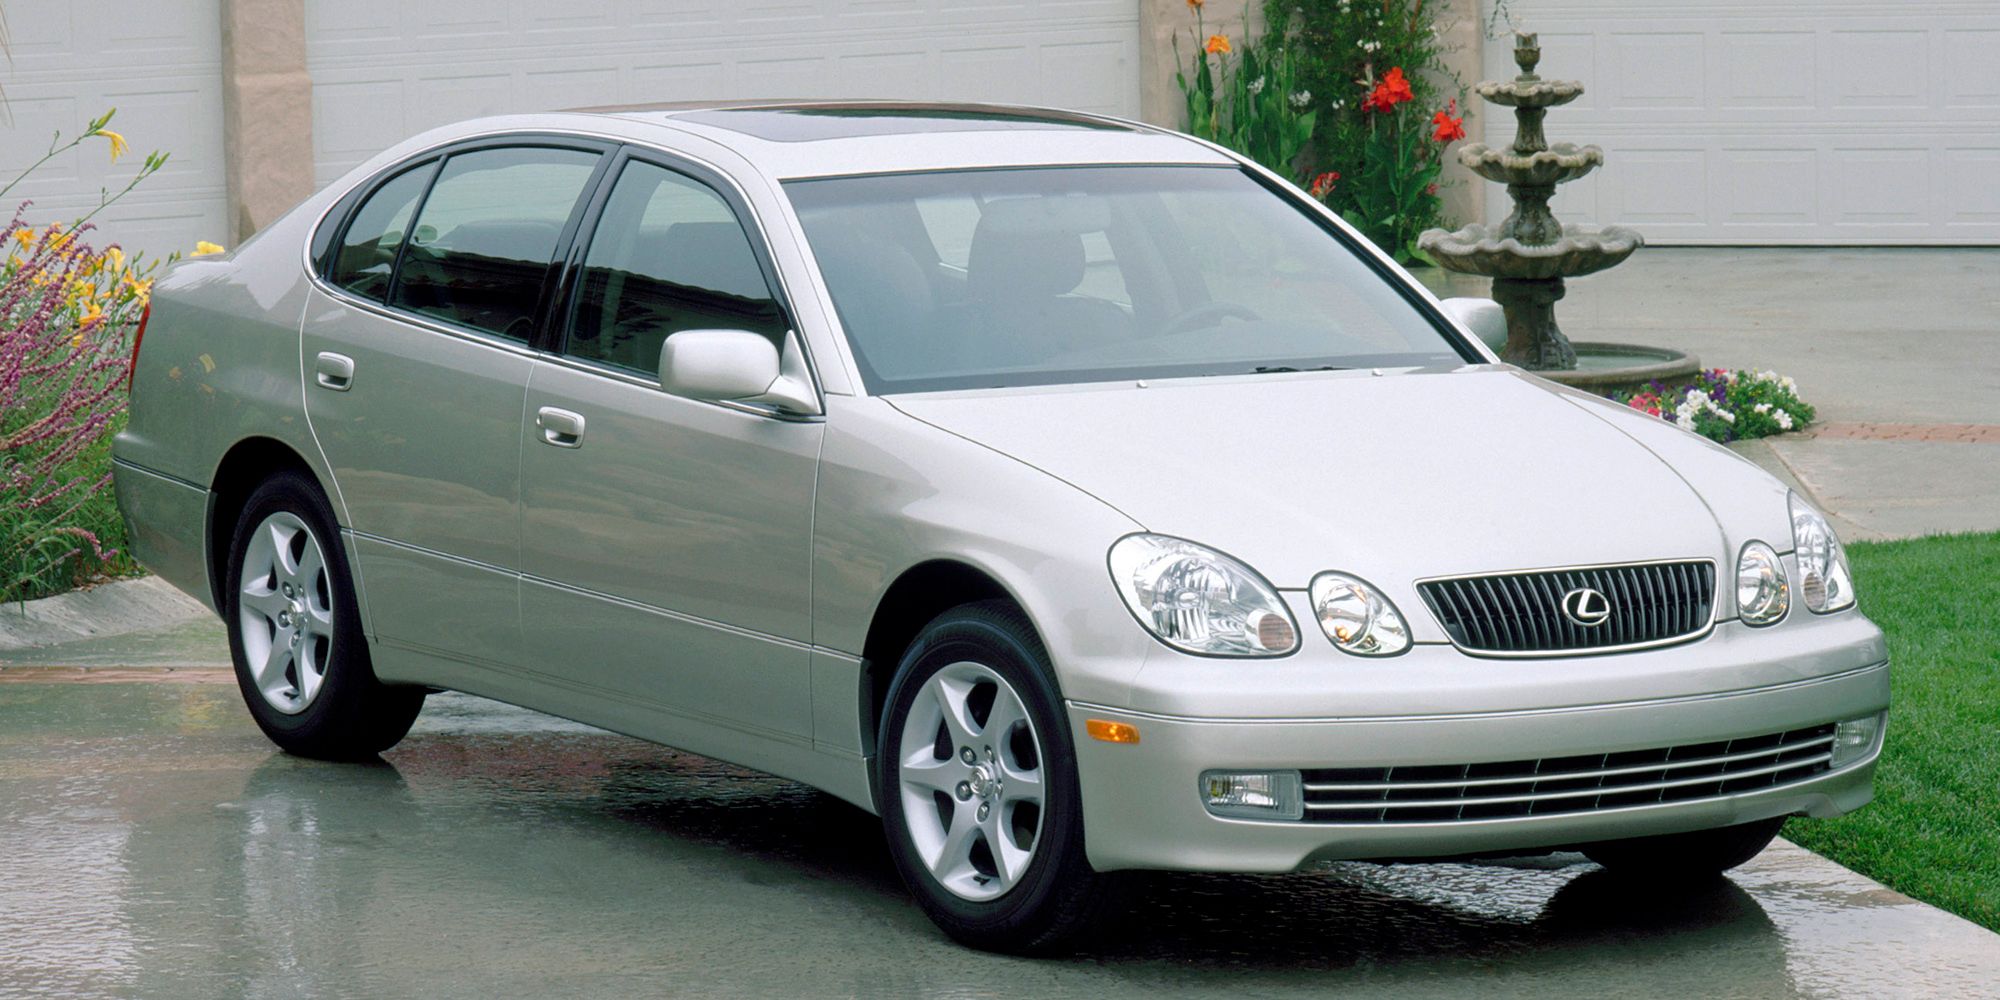 GS300 front